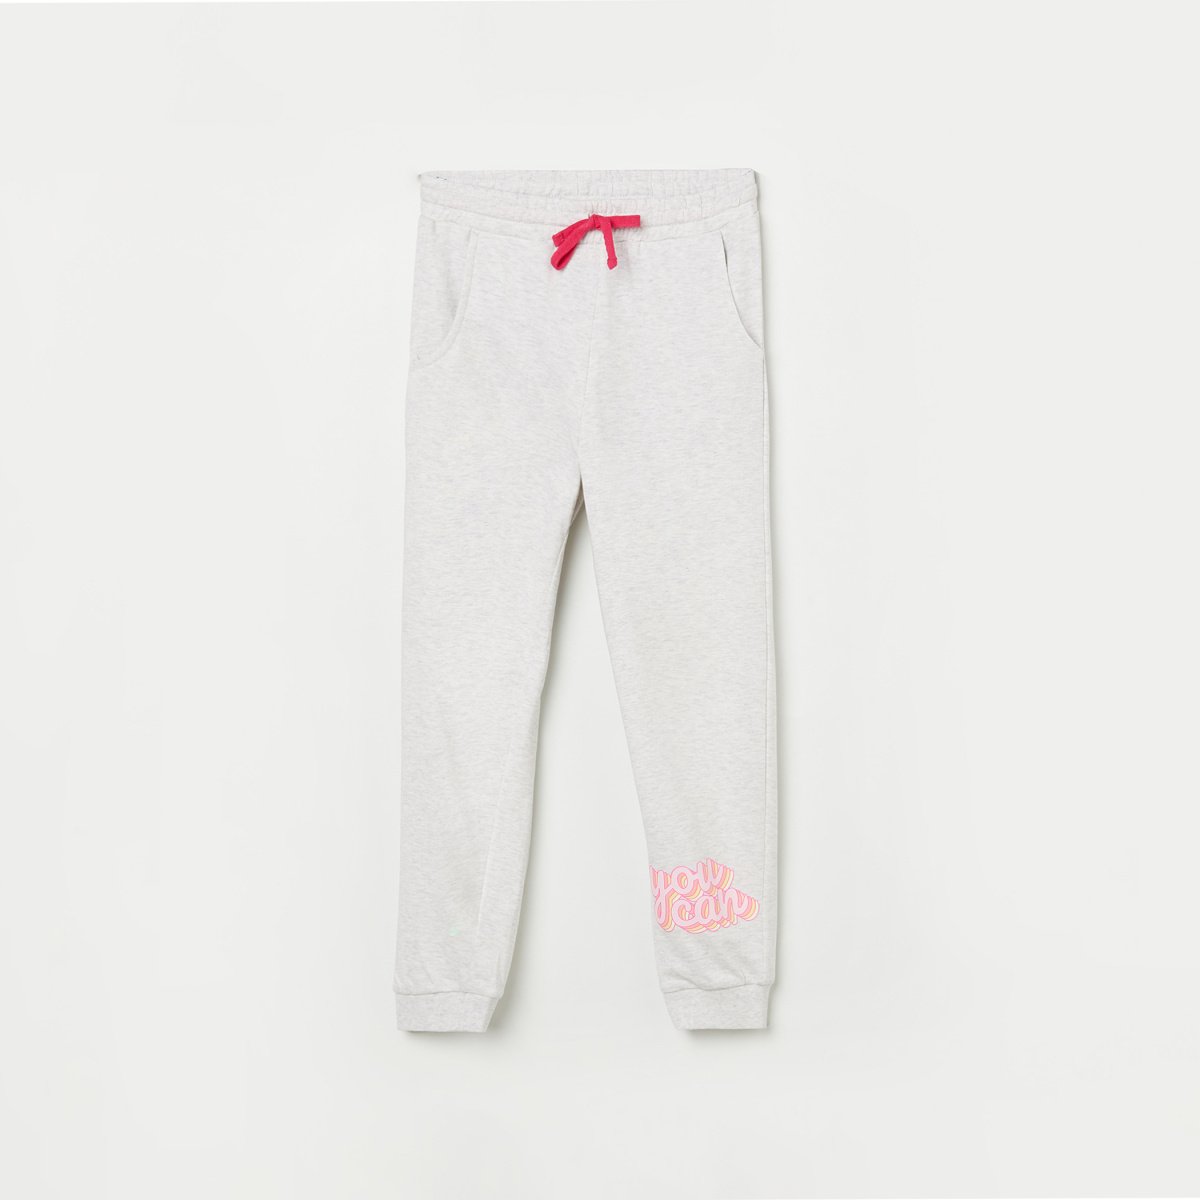 FAME FOREVER YOUNG Girls Printed Elasticated Joggers